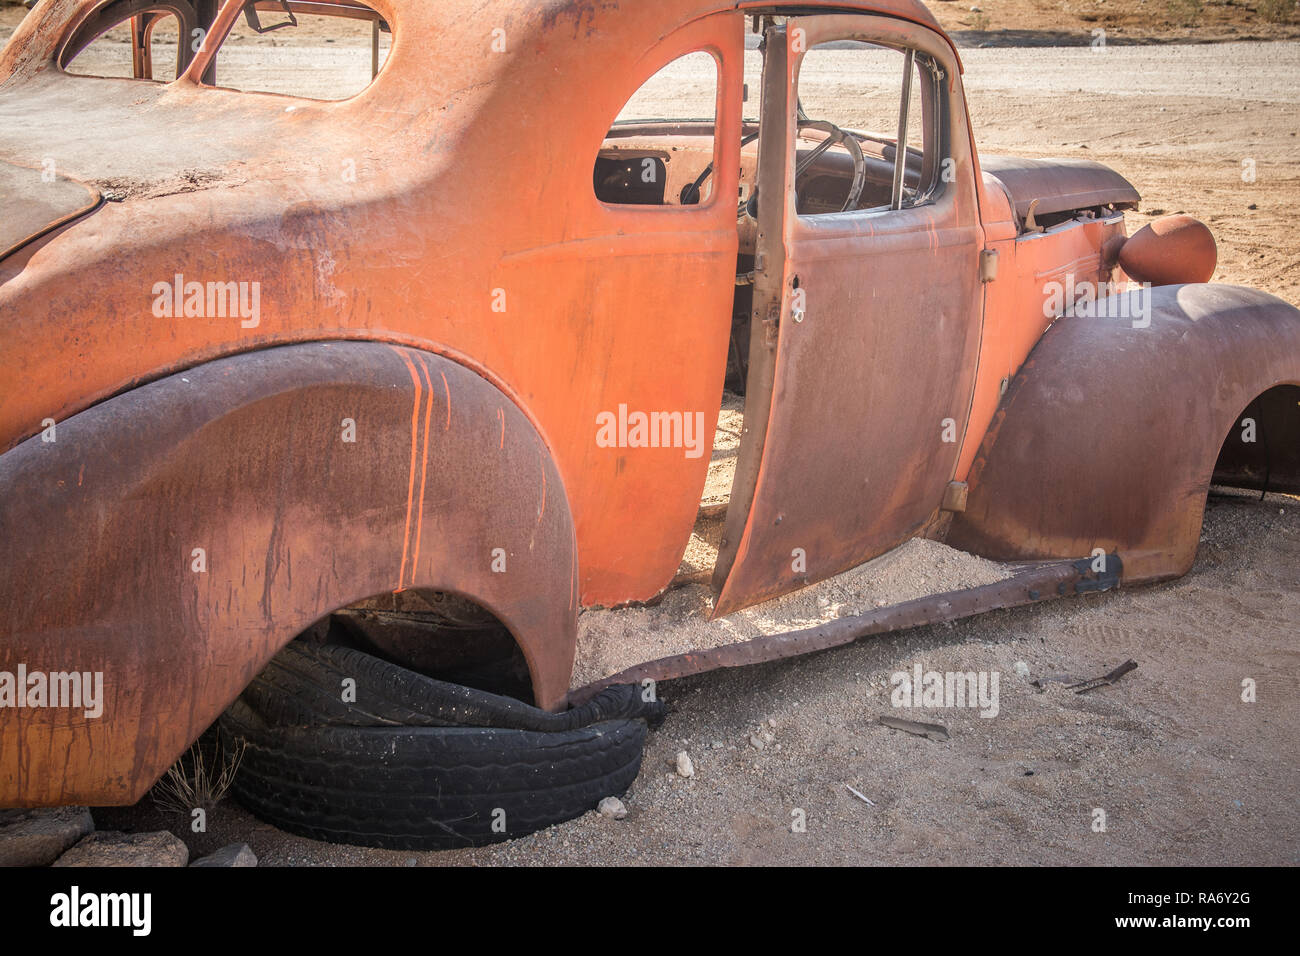 Details from old car wreck in the desert Stock Photo